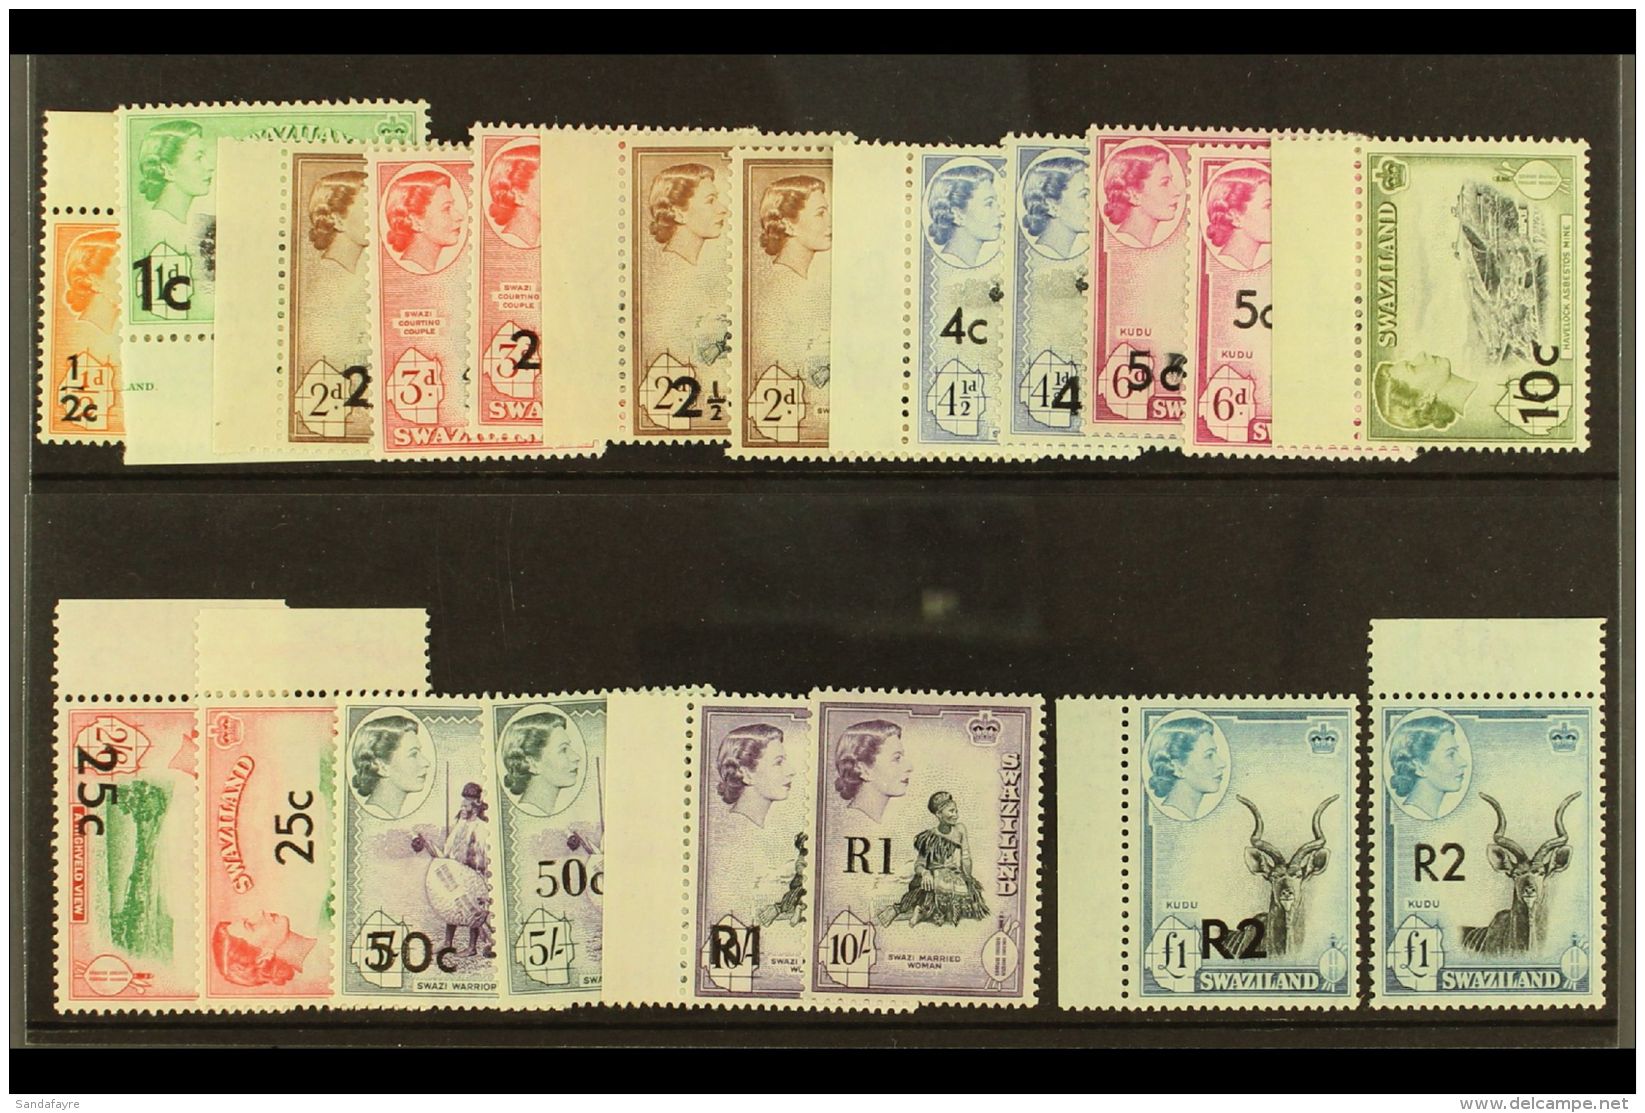 1961 Surcharges Complete Set With All Type I &amp; Type II Surcharges, SG 65/77 &amp; 69a/77a, Superb Never Hinged... - Swaziland (...-1967)